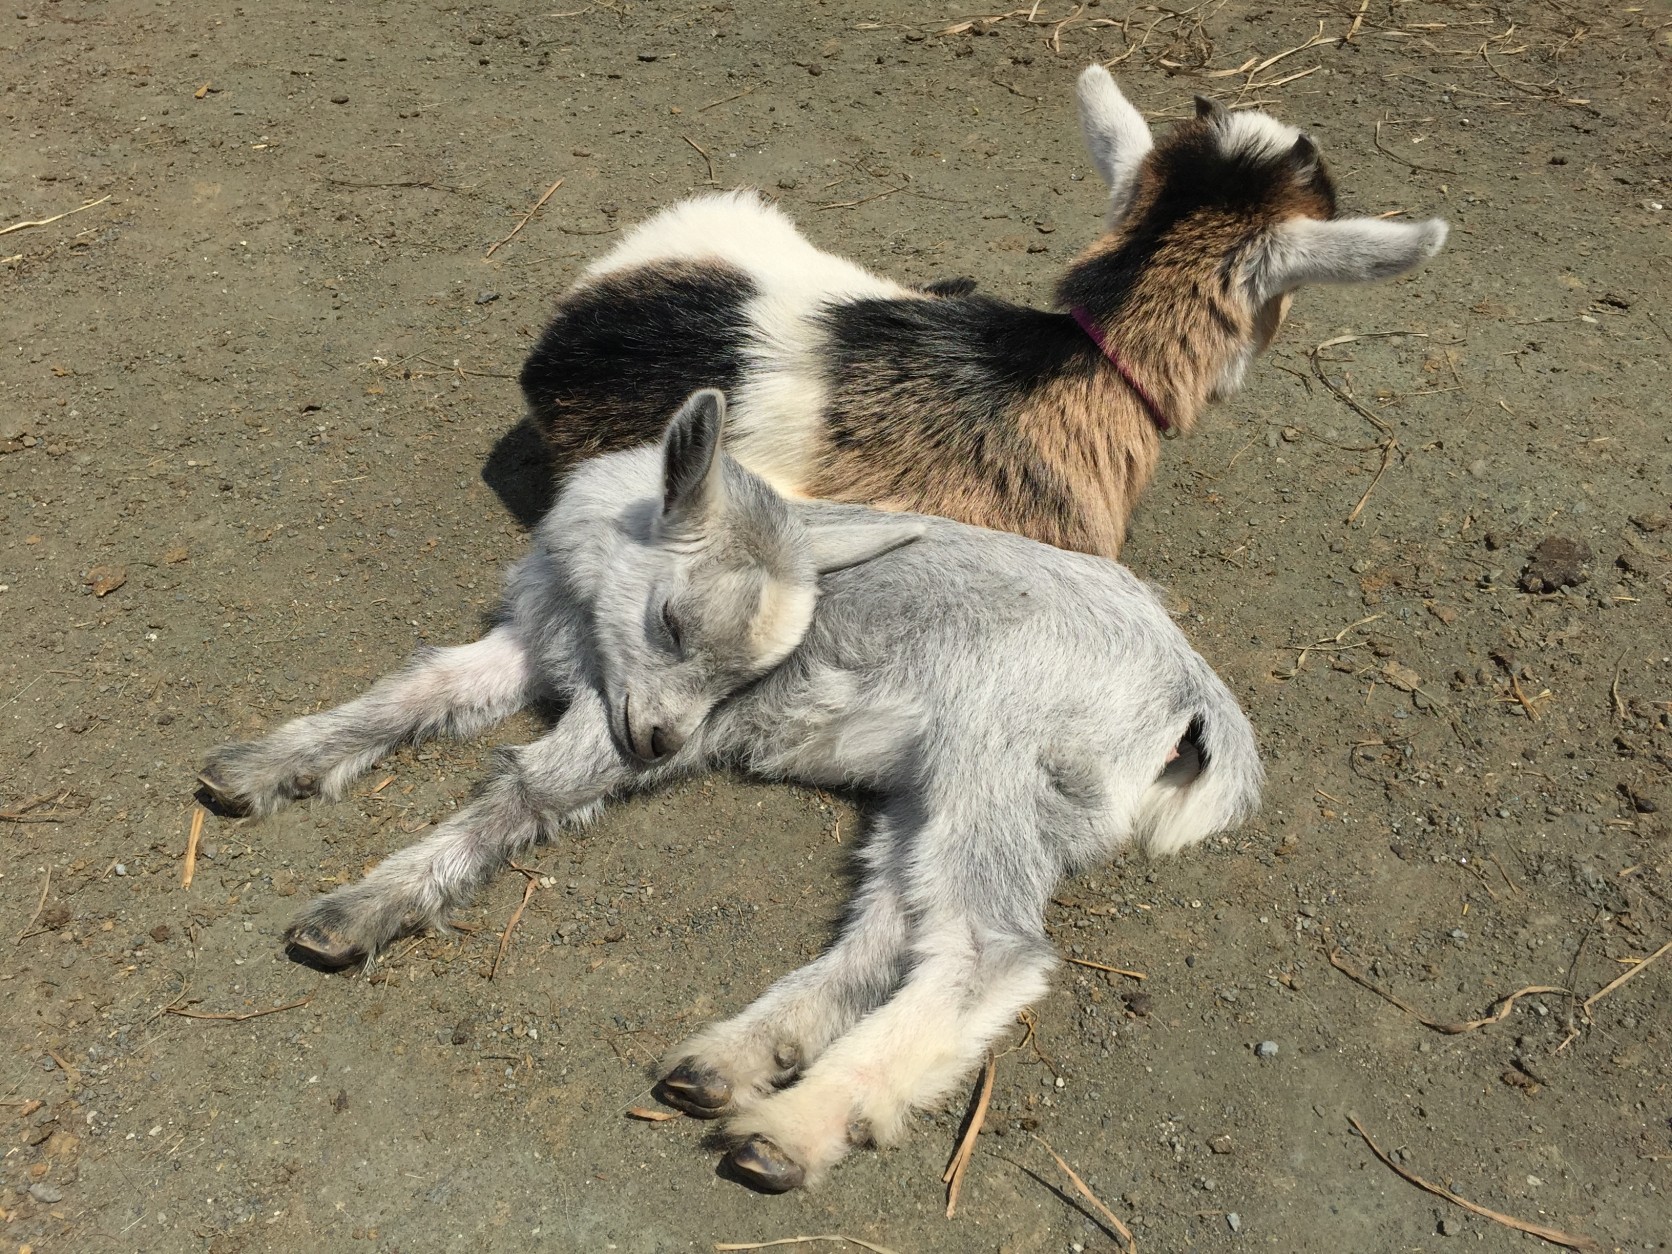 This little goat was so sleepy he just couldn't keep his head up. (WTOP/Michelle Basch)